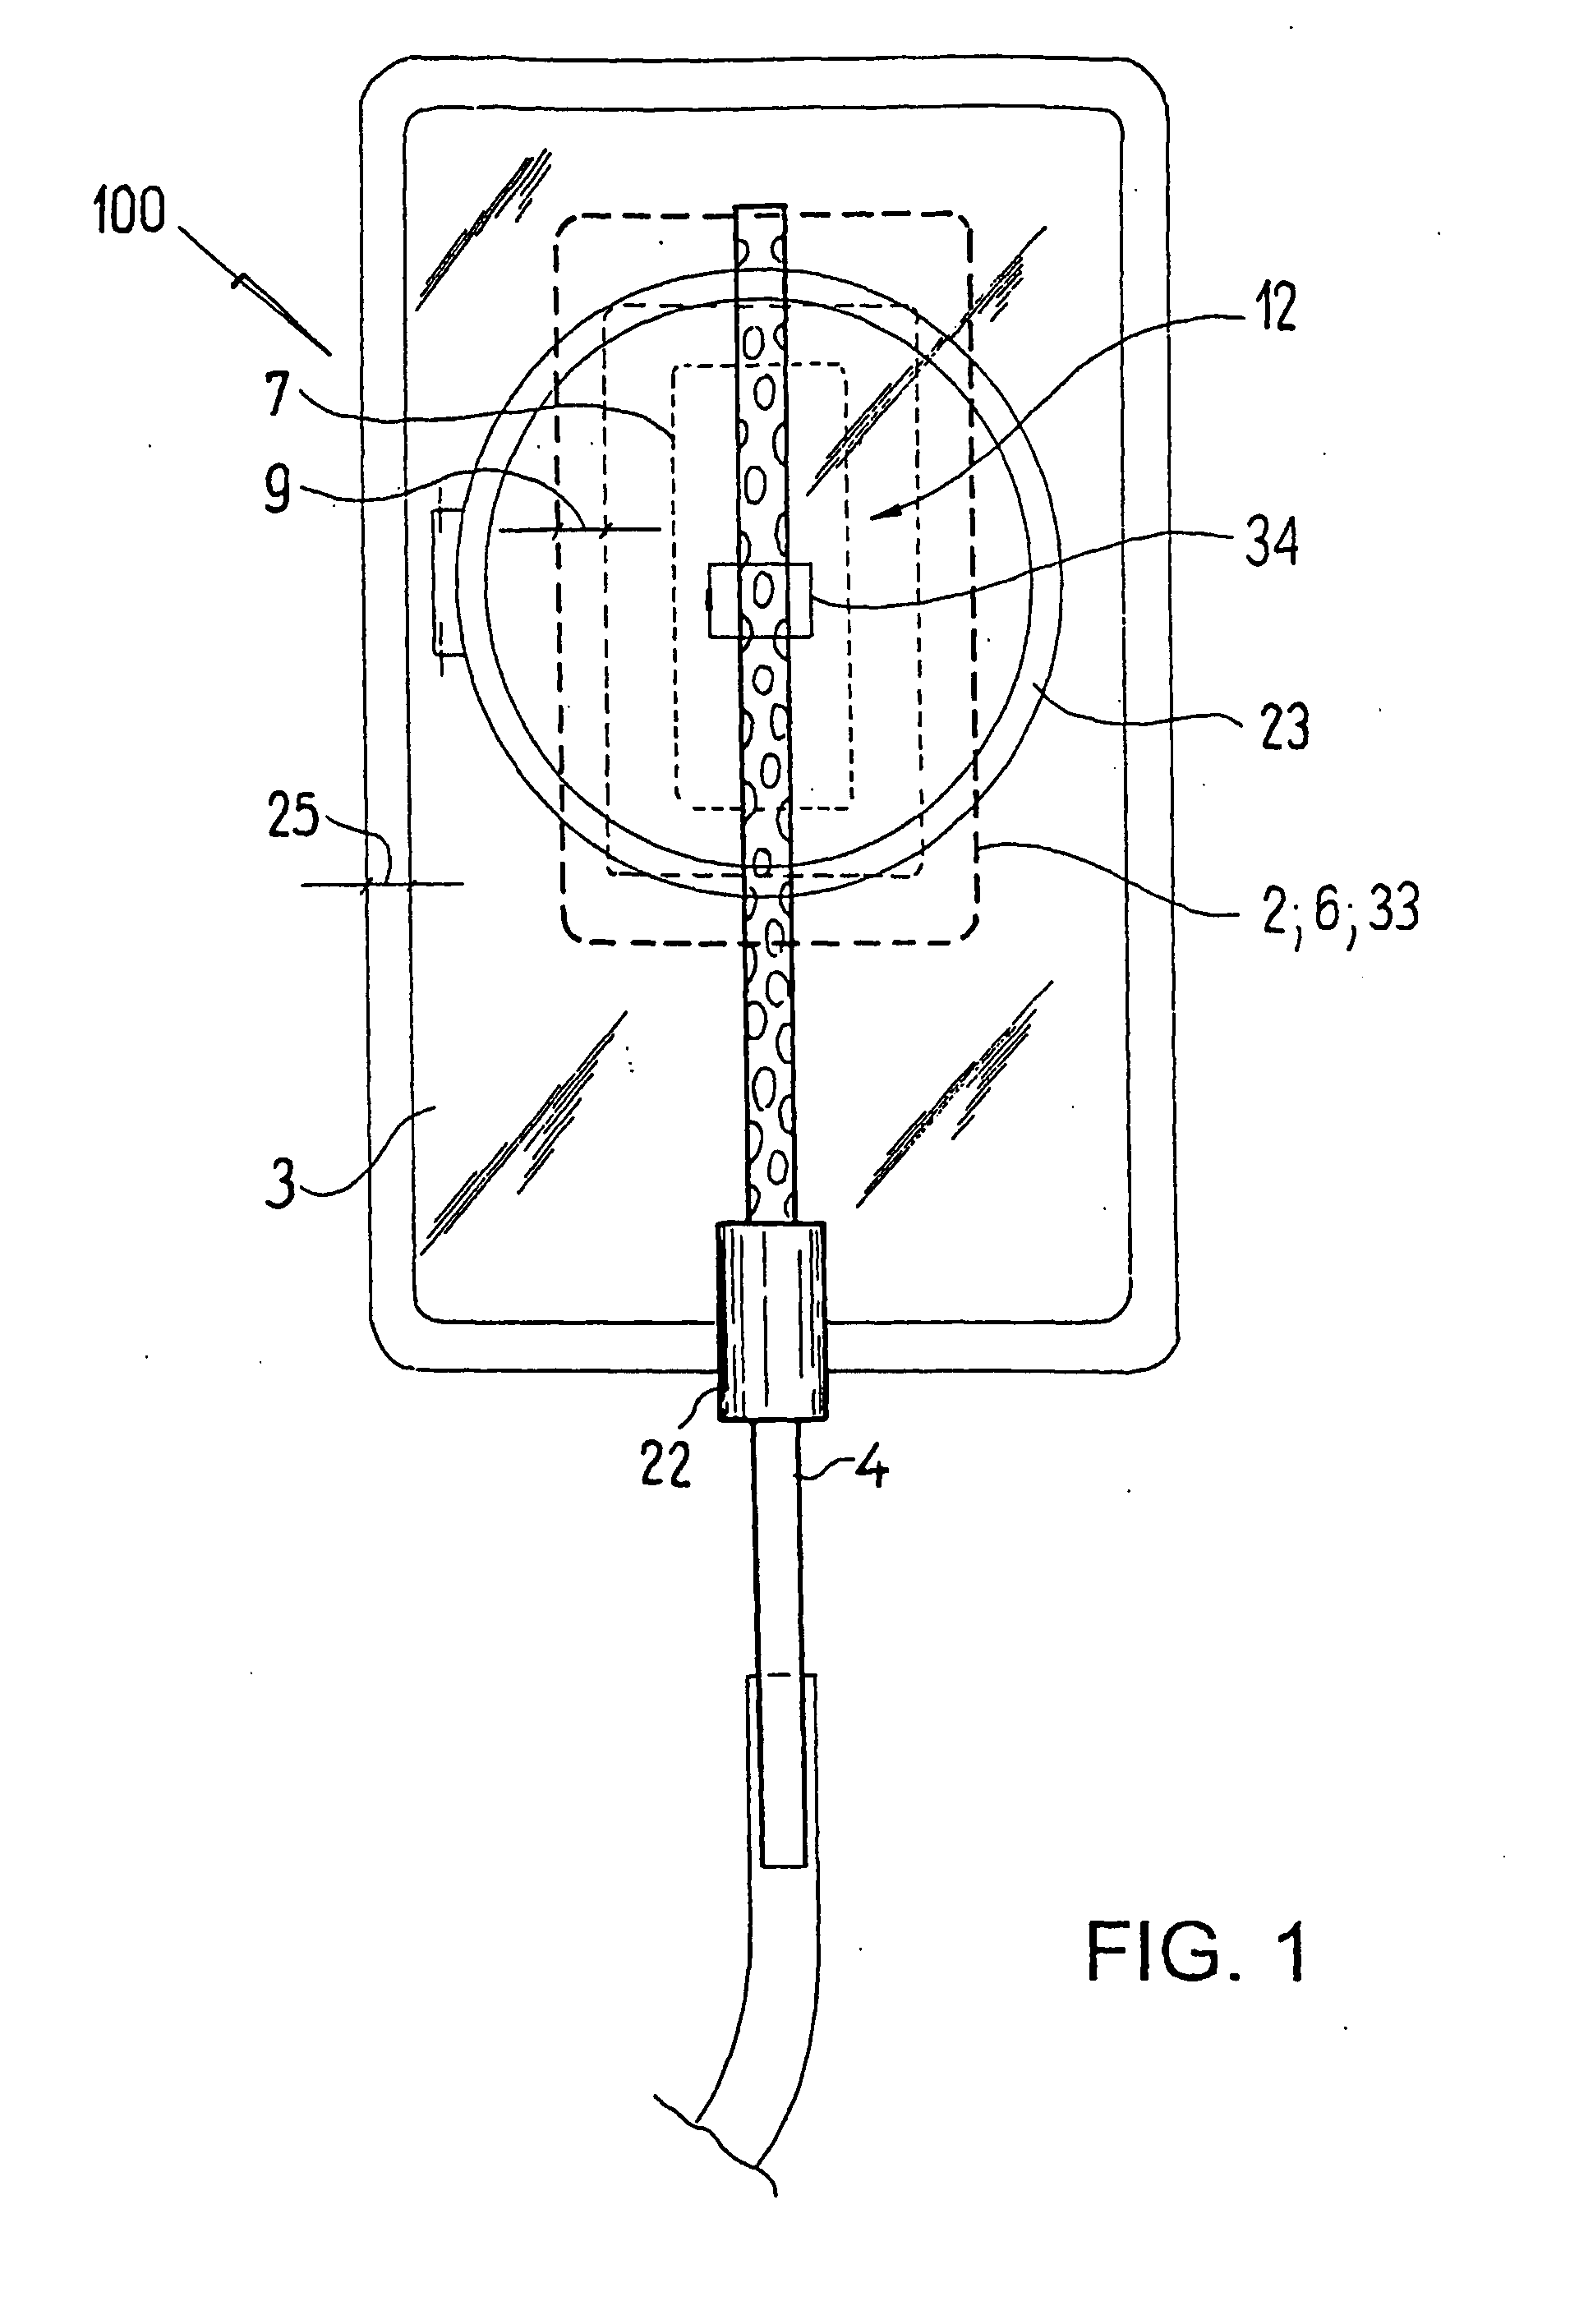 Drainage Device for the Treating Wounds Using a Reduced Pressure